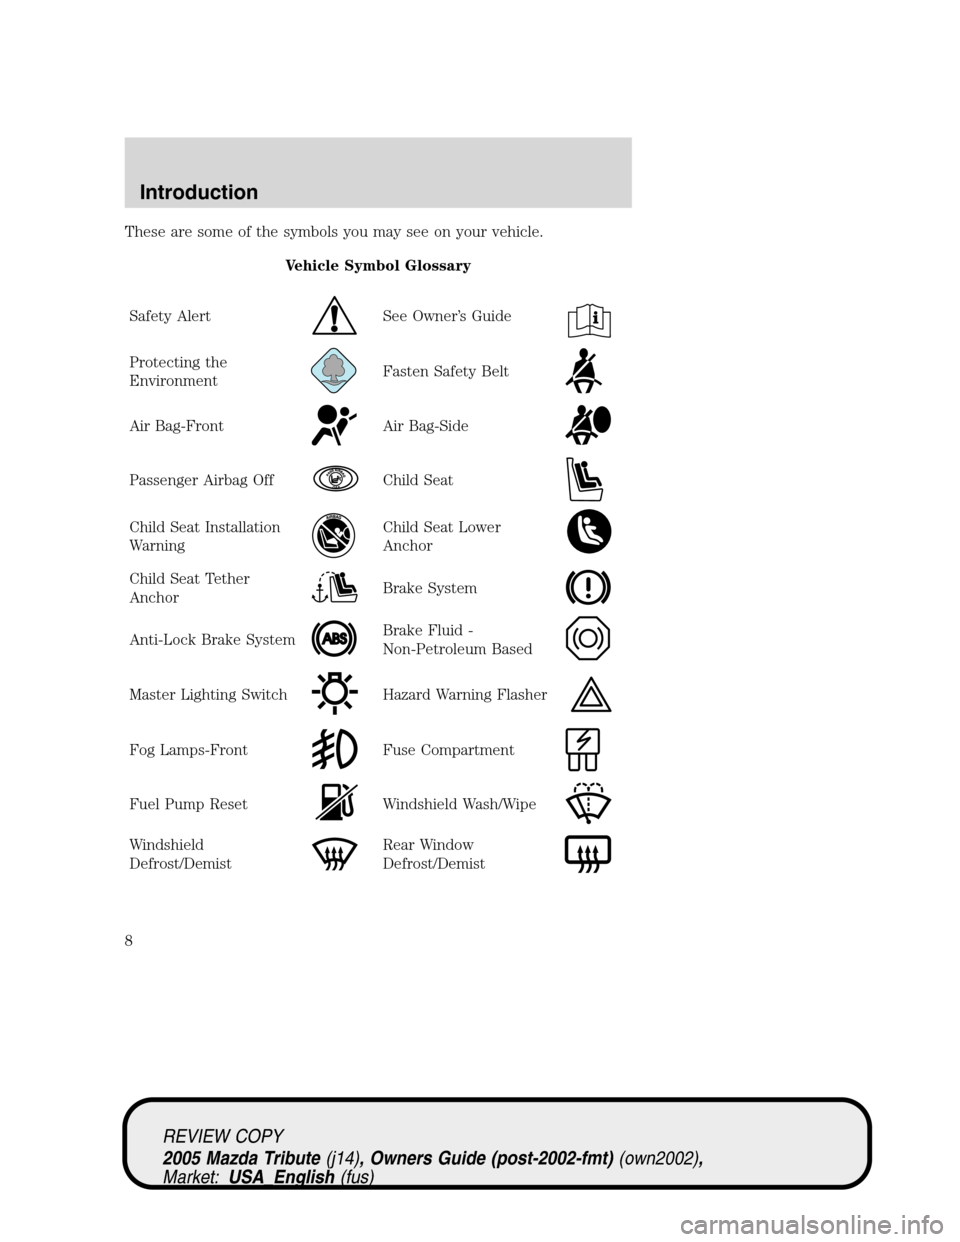 MAZDA MODEL TRIBUTE 2005  Owners Manual (in English) These are some of the symbols you may see on your vehicle.
Vehicle Symbol Glossary
Safety Alert
See Owner’s Guide
Protecting the
EnvironmentFasten Safety Belt
Air Bag-FrontAir Bag-Side
Passenger Air